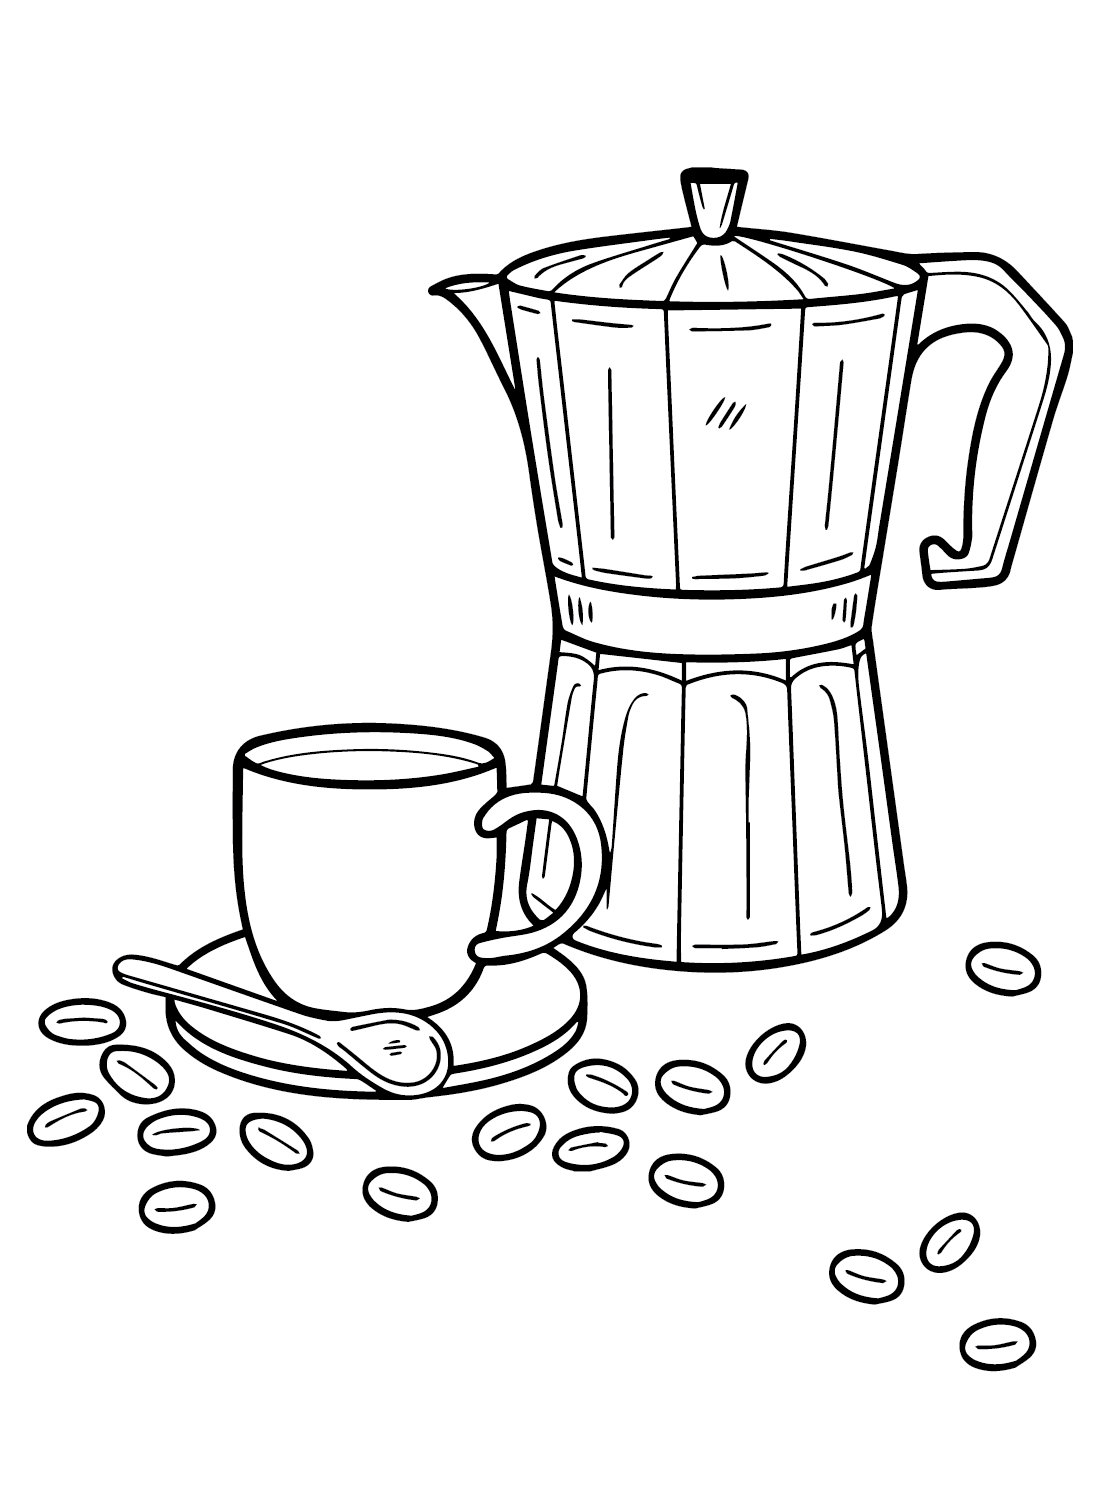 Coffee Images Coloring Pages